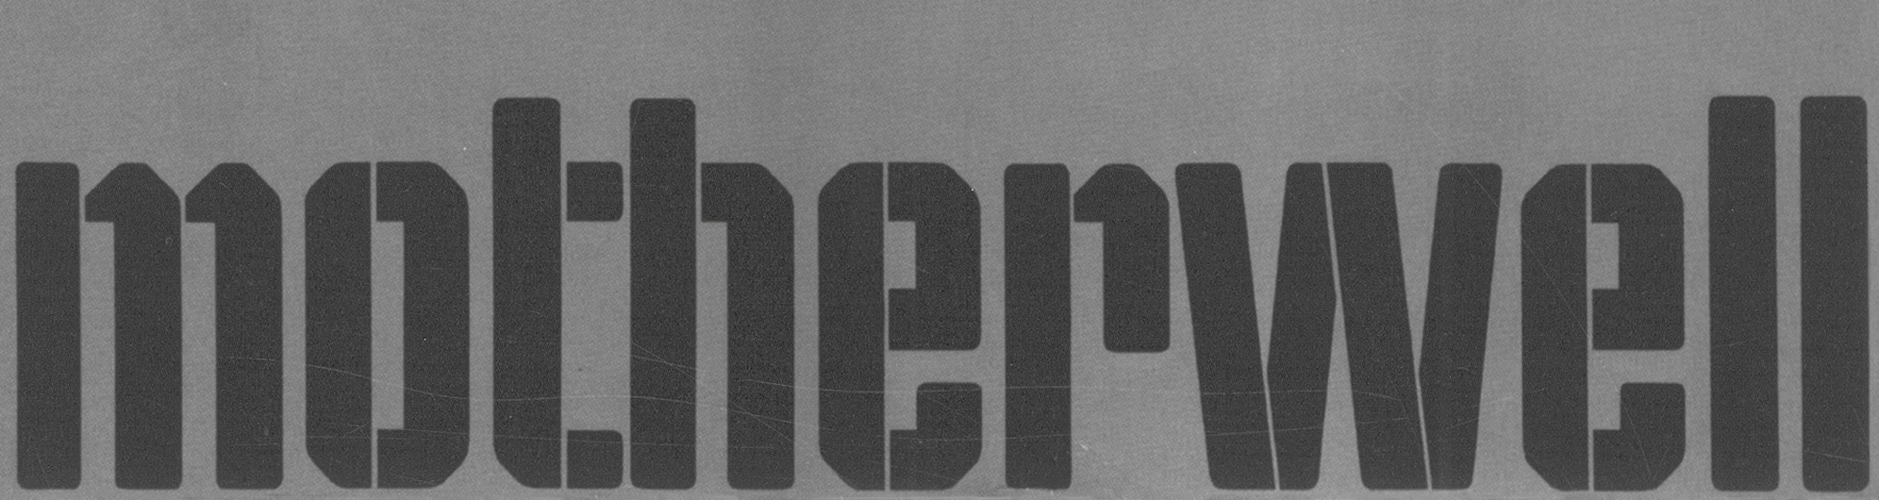 The ‘Motherwell’ poster lettering by Wim Crouwel, 1966.